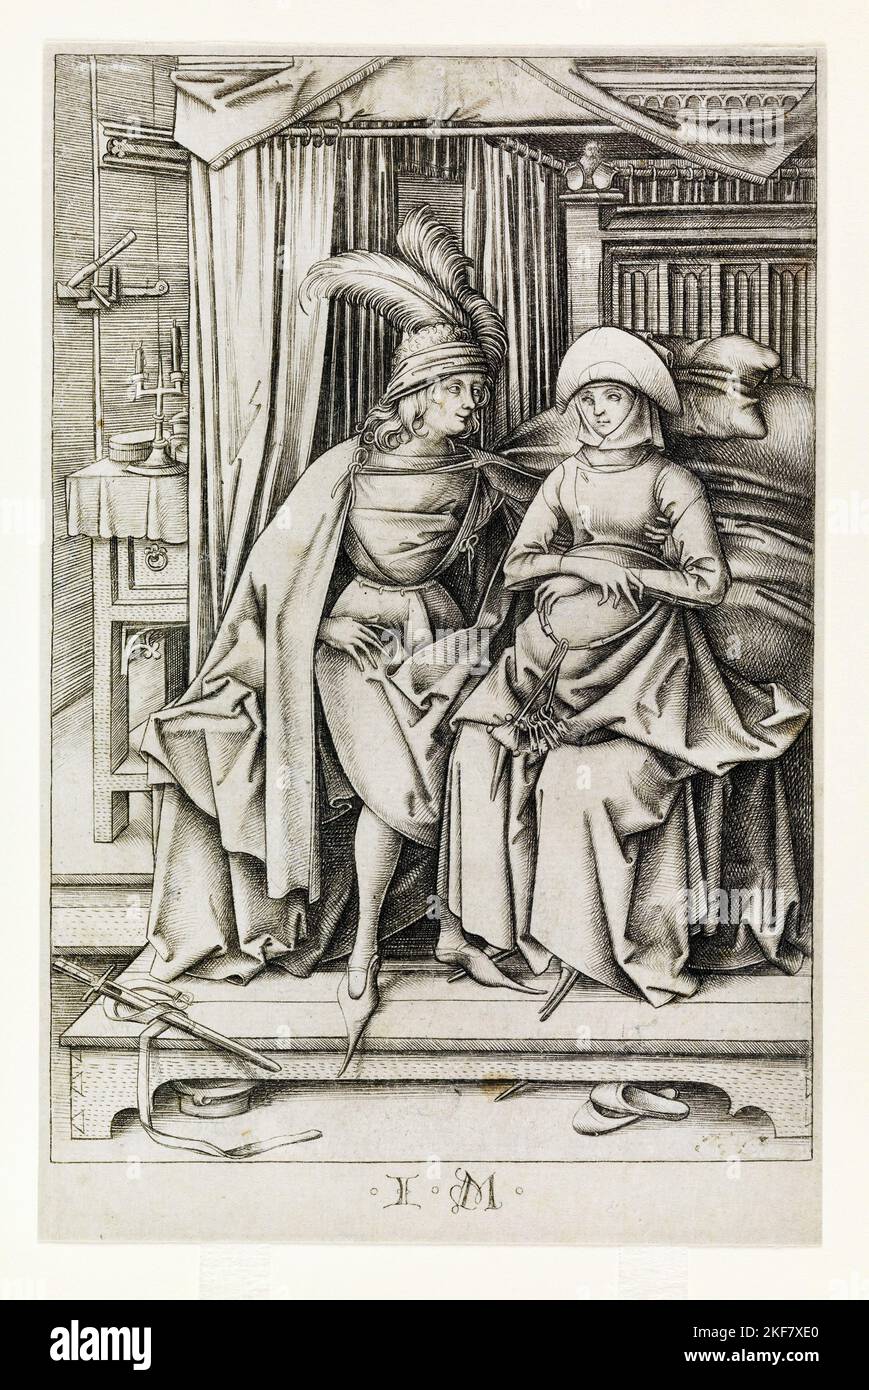 Israhel van Meckenem; Couple Seated on a Bed, from Scenes of Daily Life; Circa 1490; Engraving; Metropolitan Museum of Art, New York City, USA. Stock Photo